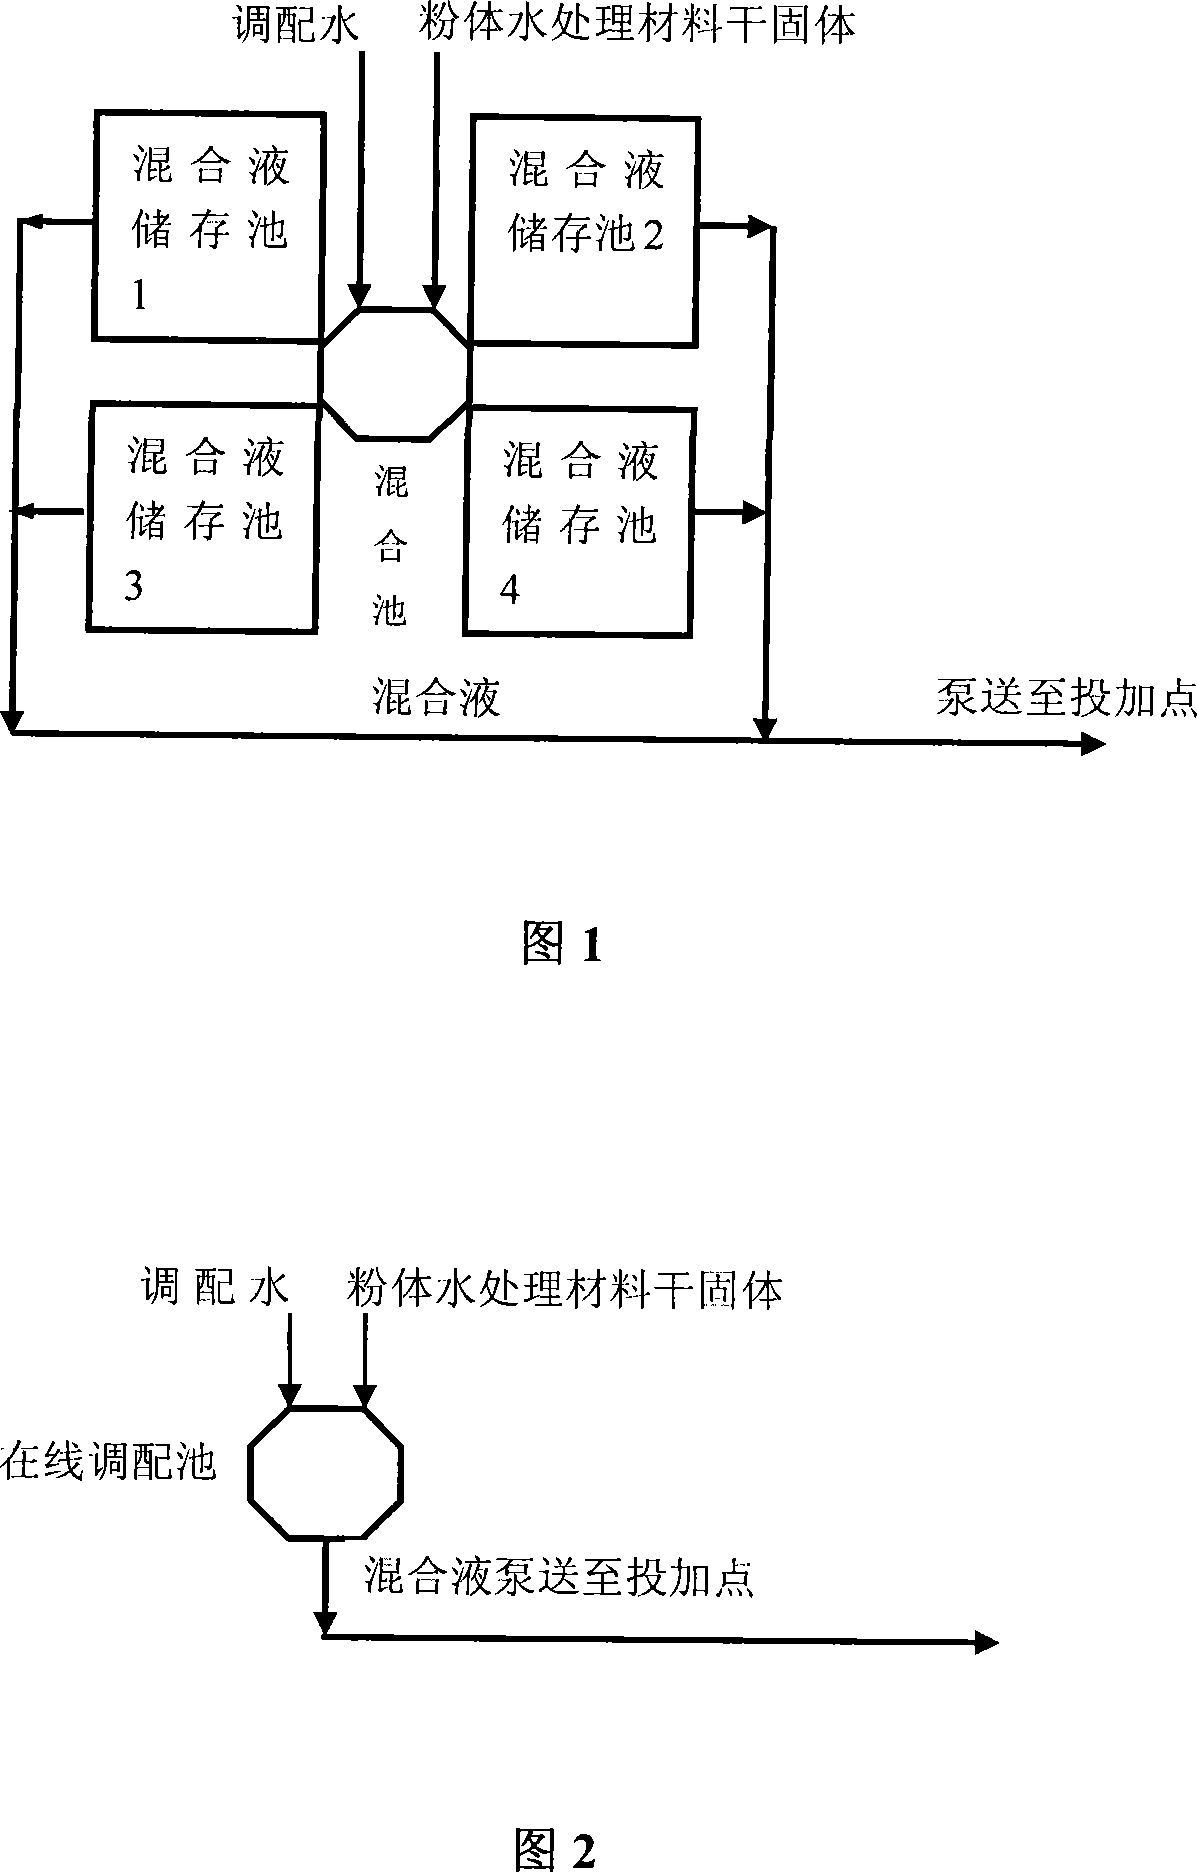 Powder water-treatment material on-line allocating and wet type treating water adding method